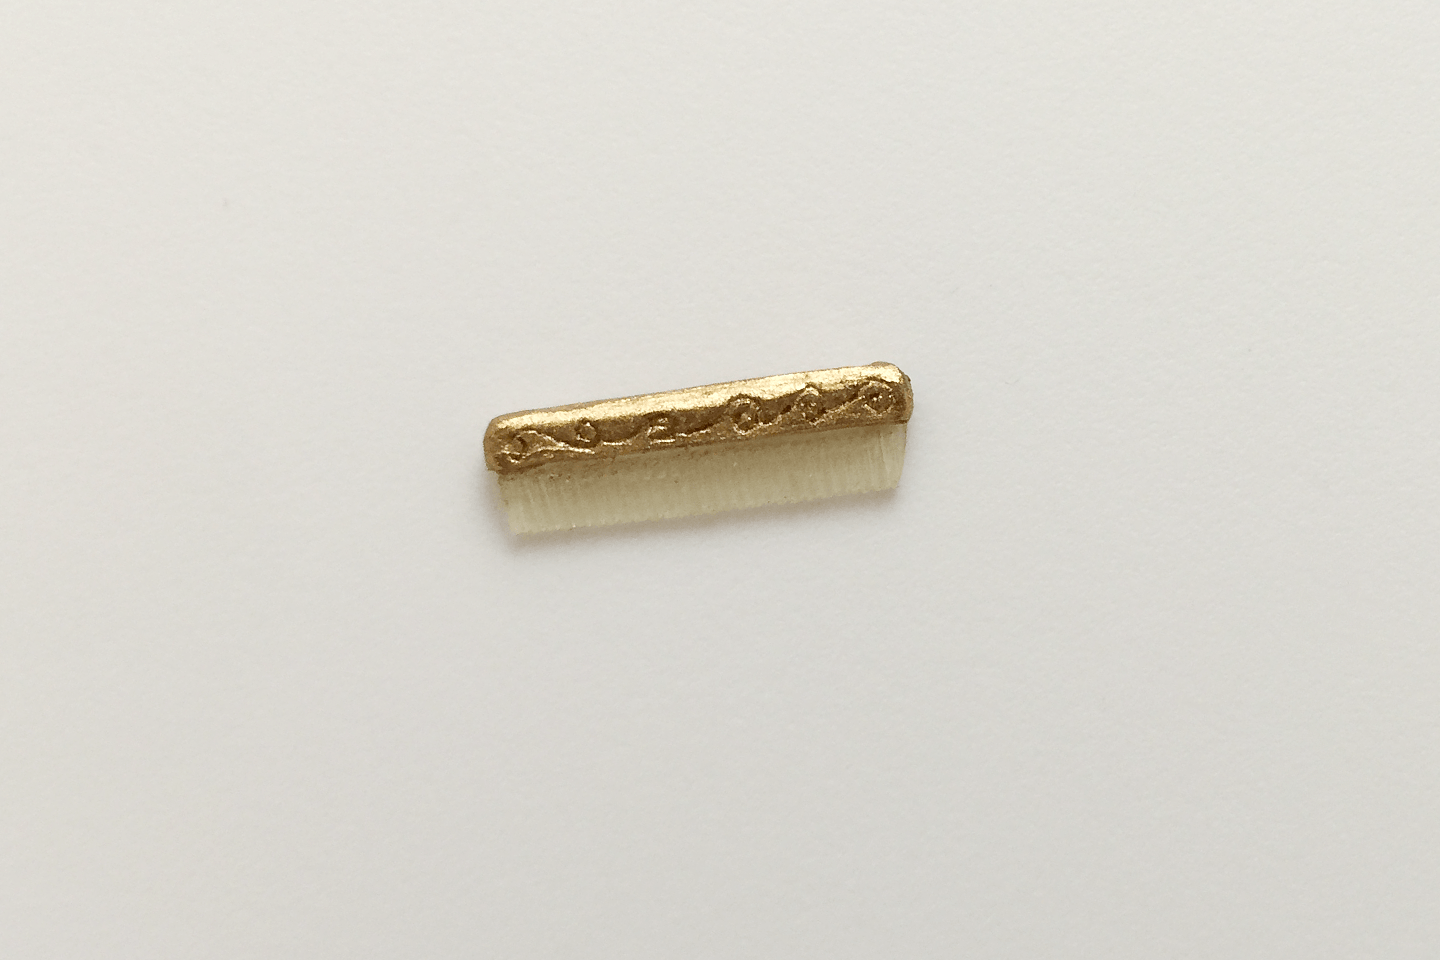 Gold Old Fashioned Comb